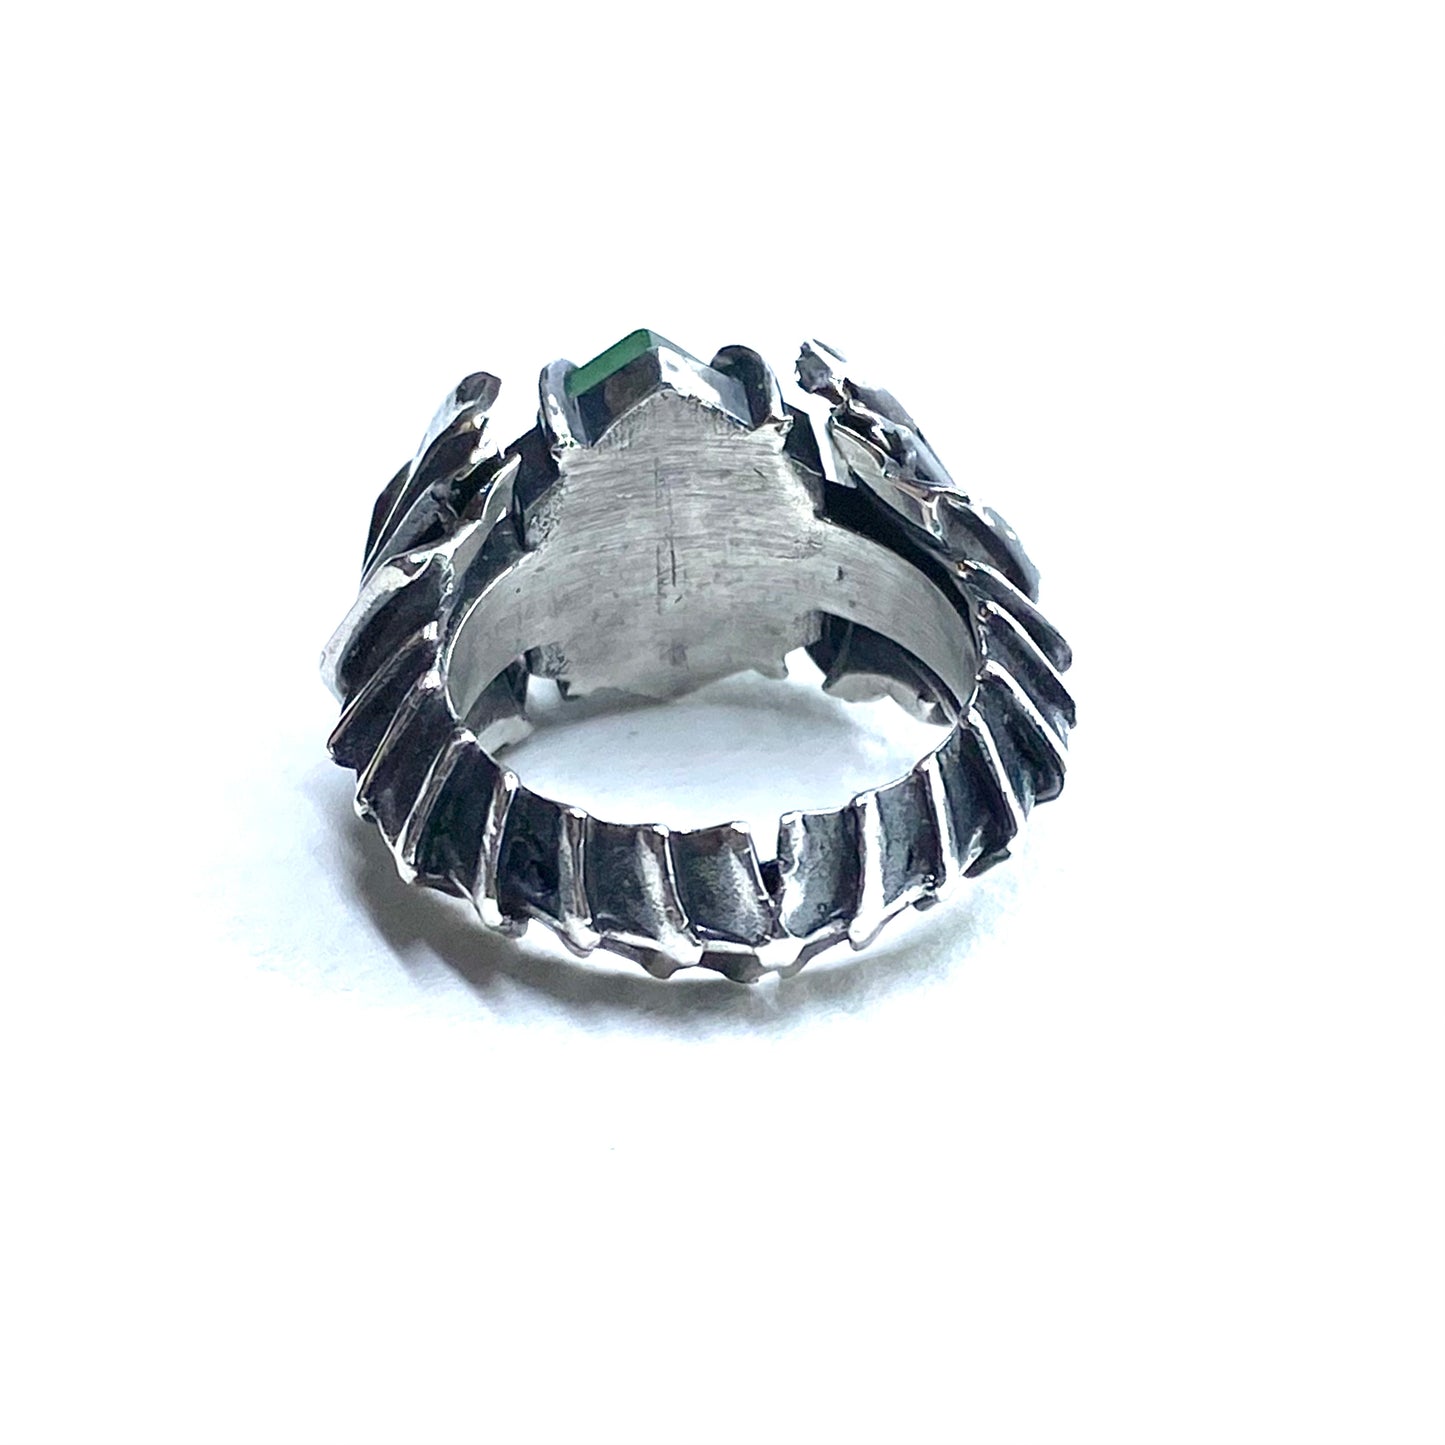 Black Knight’s Ring Set with Green Strawberry Quartz in Sterling Silver